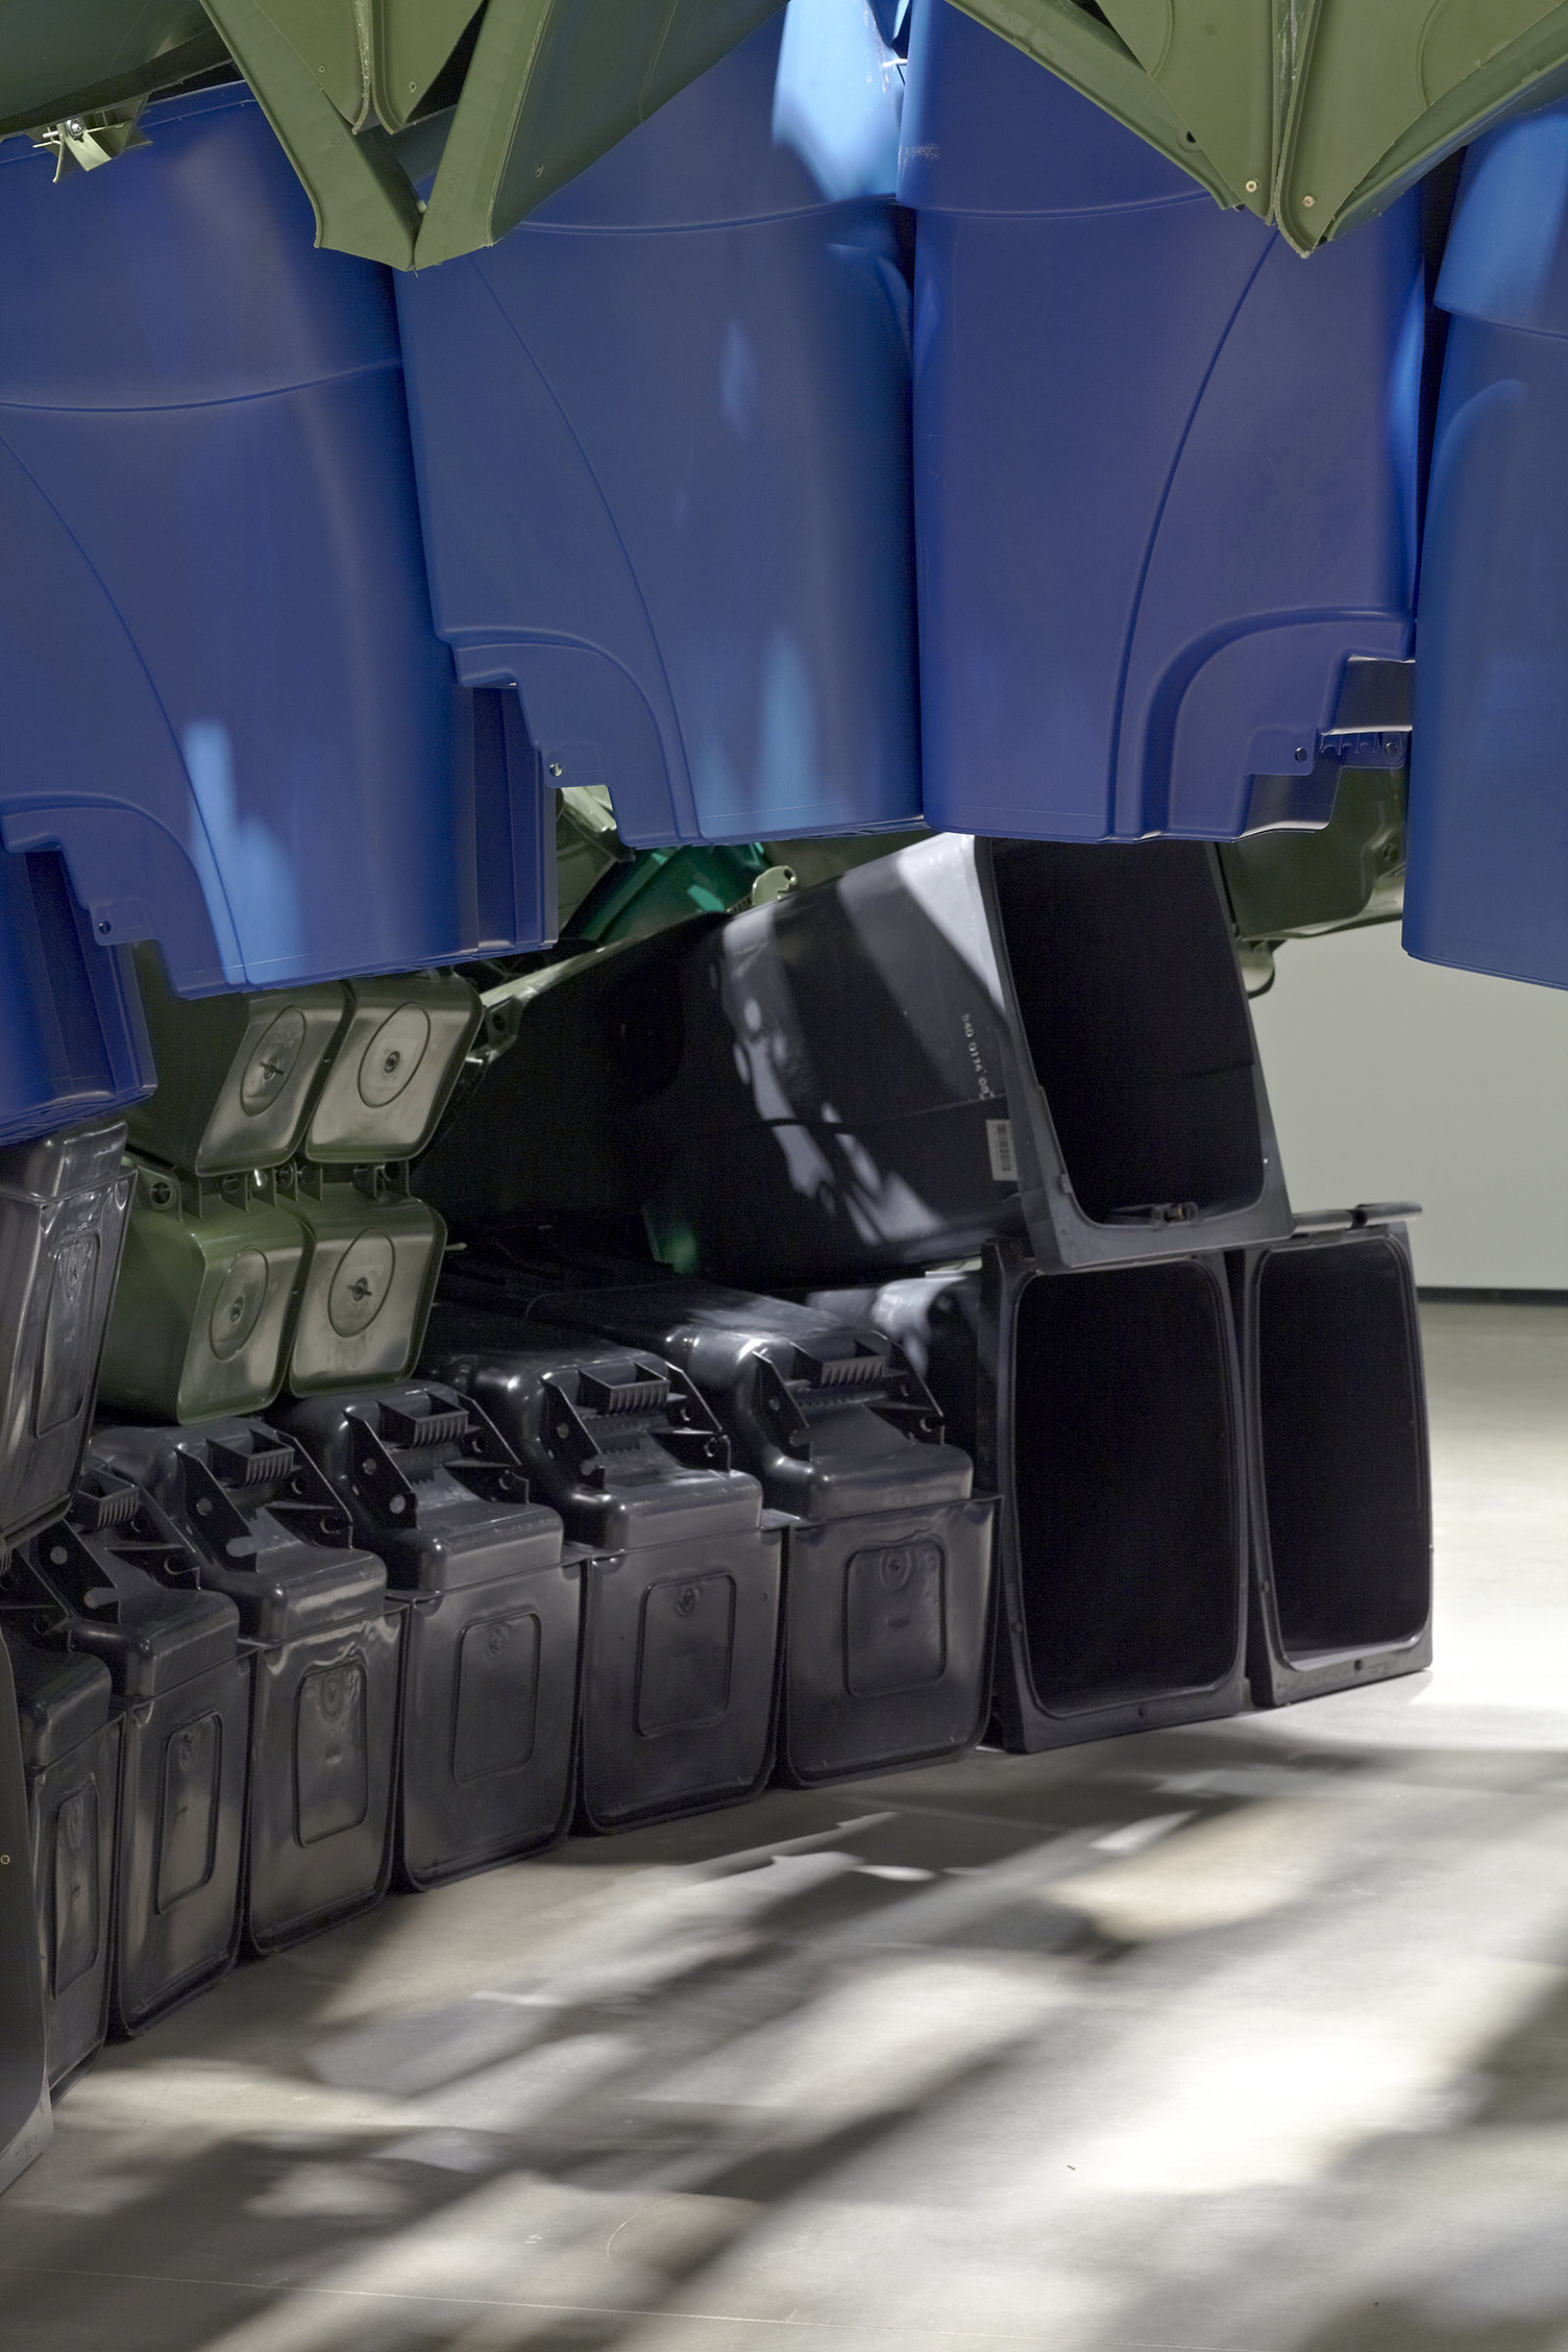 Brian Jungen, Carapace (detail), 2009–2011, plastic recycling containers, 144 x 264 x 252 in. (370 x 670 x 640 cm). Installation view, Art Gallery of Alberta, Edmonton, AB, 2011